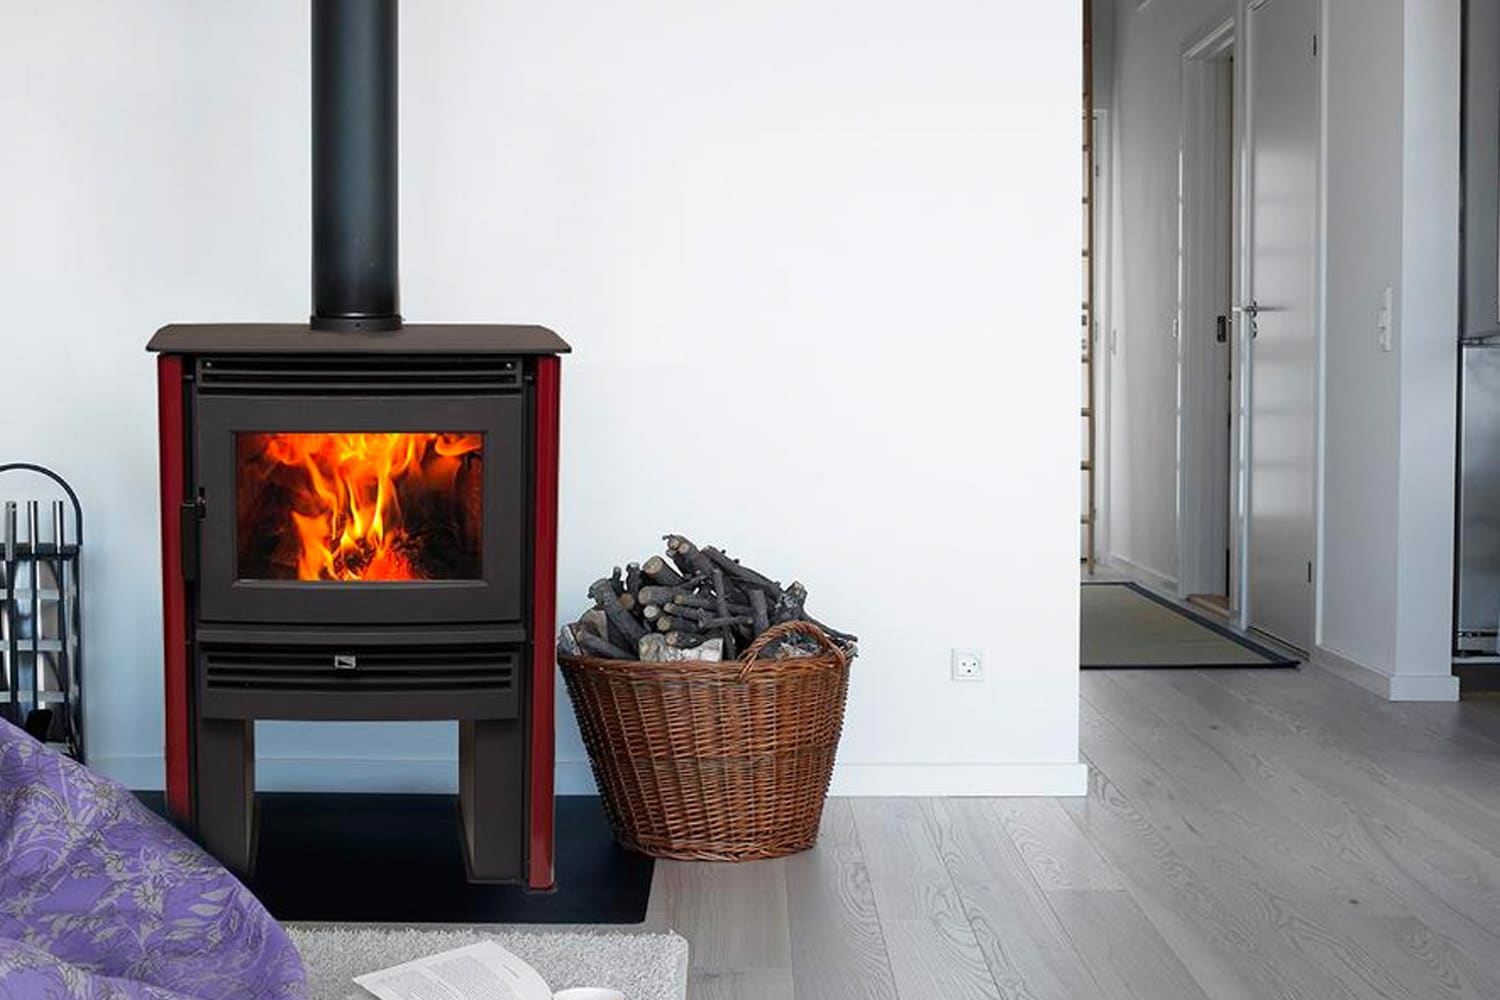 What makes the Pacific Energy Wood heater so different? 